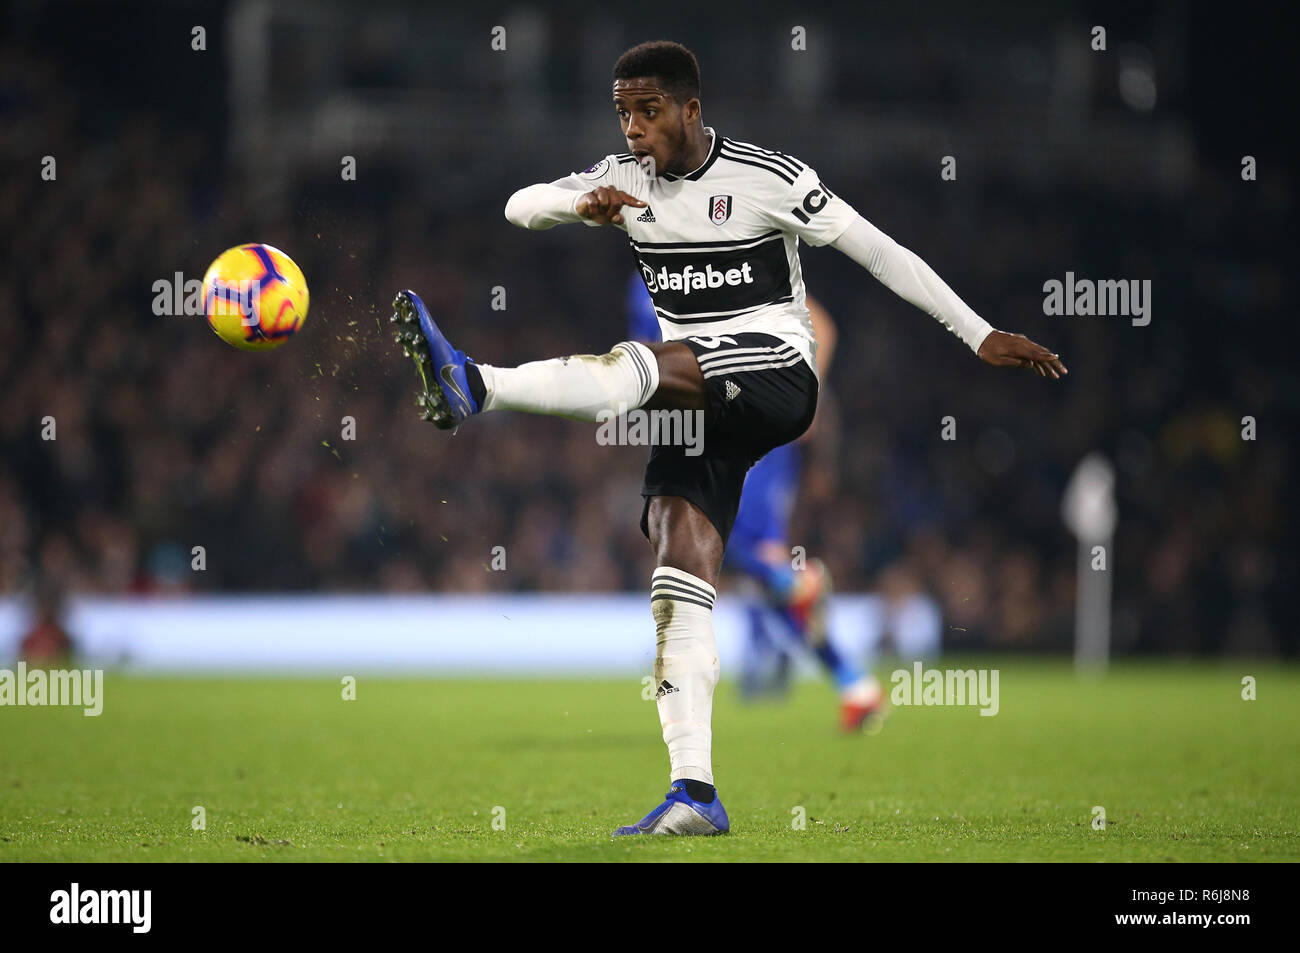 Fulham's Ryan Sessegnon in action during the Premier League match at Craven Cottage, London. PRESS ASSOCIATION Photo. Picture date: Wednesday December 5, 2018. See PA story SOCCER Fulham. Photo credit should read: Steven Paston/PA Wire. RESTRICTIONS: No use with unauthorised audio, video, data, fixture lists, club/league logos or 'live' services. Online in-match use limited to 120 images, no video emulation. No use in betting, games or single club/league/player publications. Stock Photo